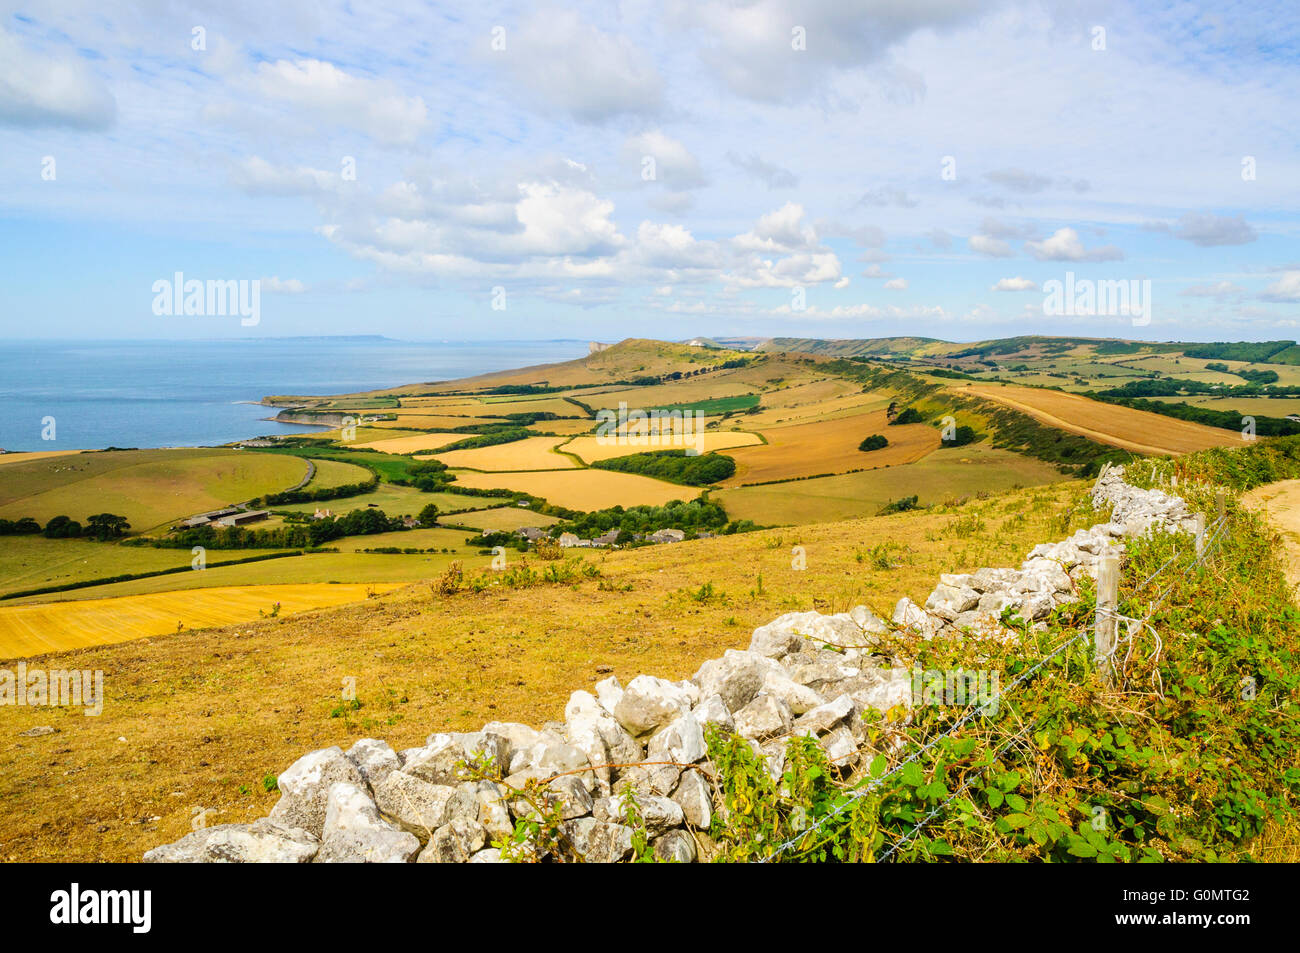 Looking west from near Swyre Head on the Isle of Purbeck Dorset with Portland Bill in the distance Stock Photo